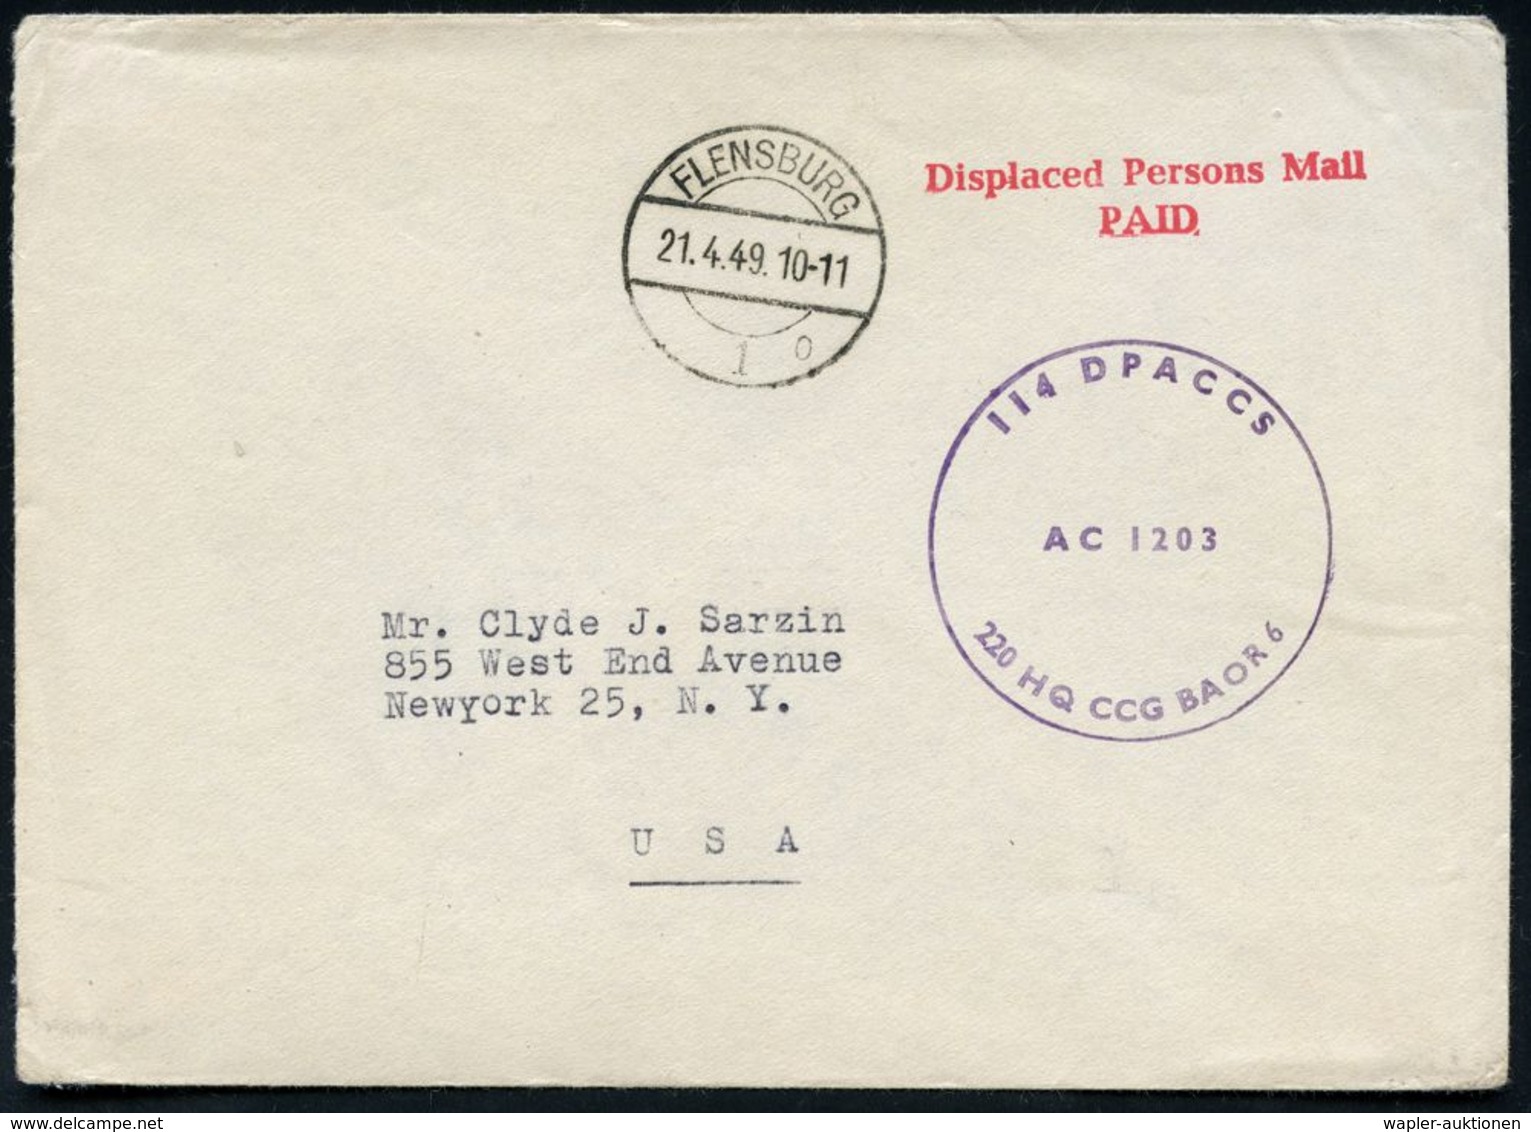 FLENSBURG/ 1/ O 1949 (21.4.) 1K-Steg + Roter 2L: Displaced Persons Mail / PAID + Viol. 1K-HdN: 114 DPACCS/AC 1203/22 HQ  - UNO